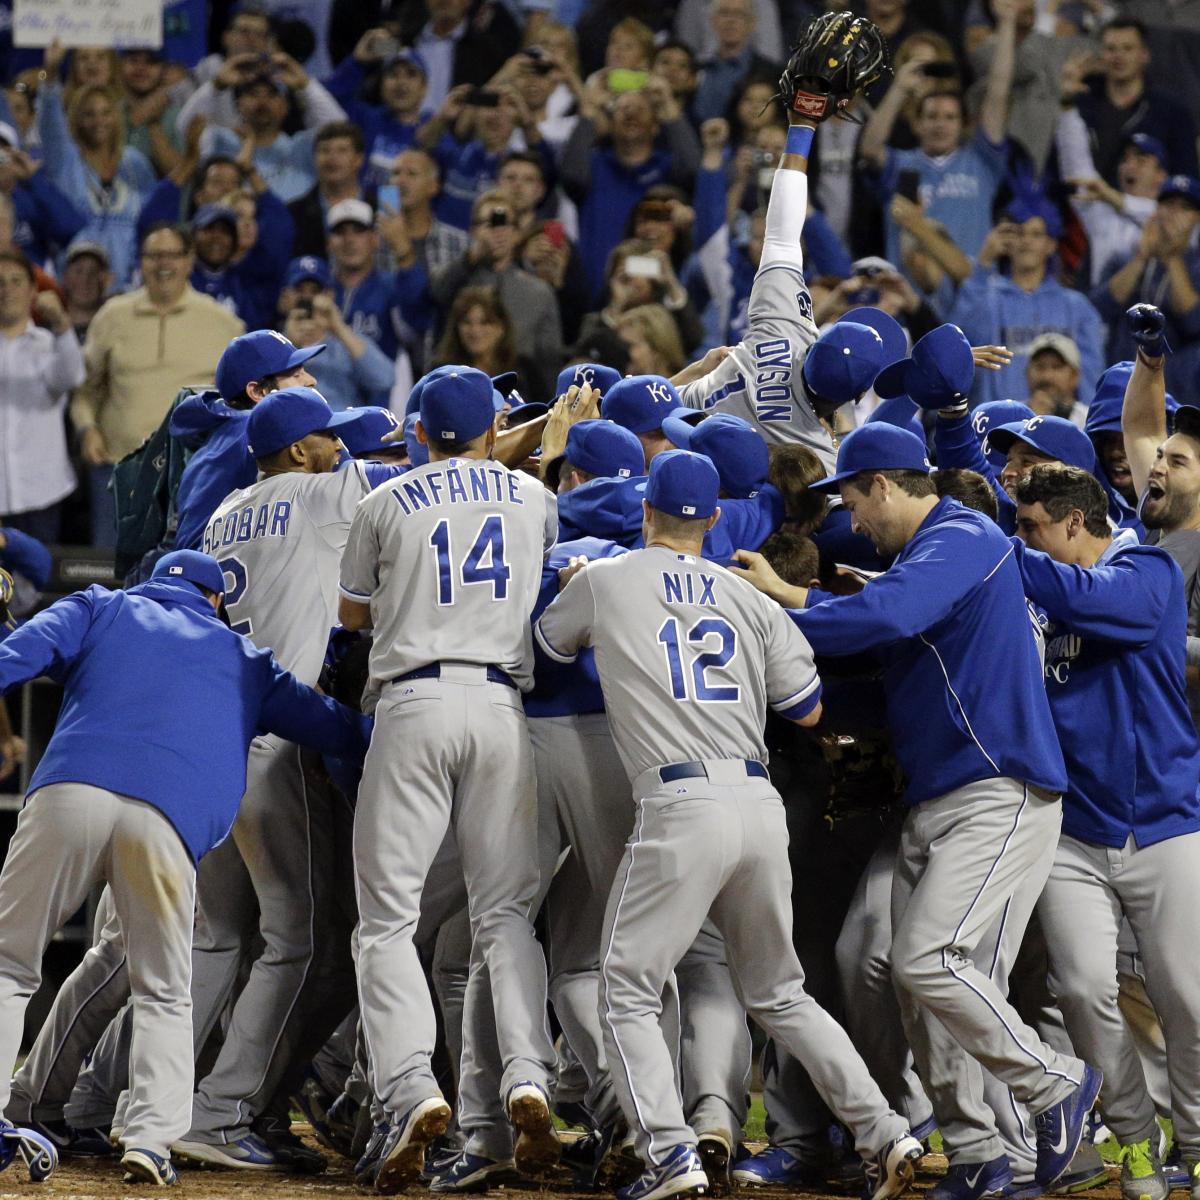 Sports Report: Royals Are One Game Away From 29-Year World Series